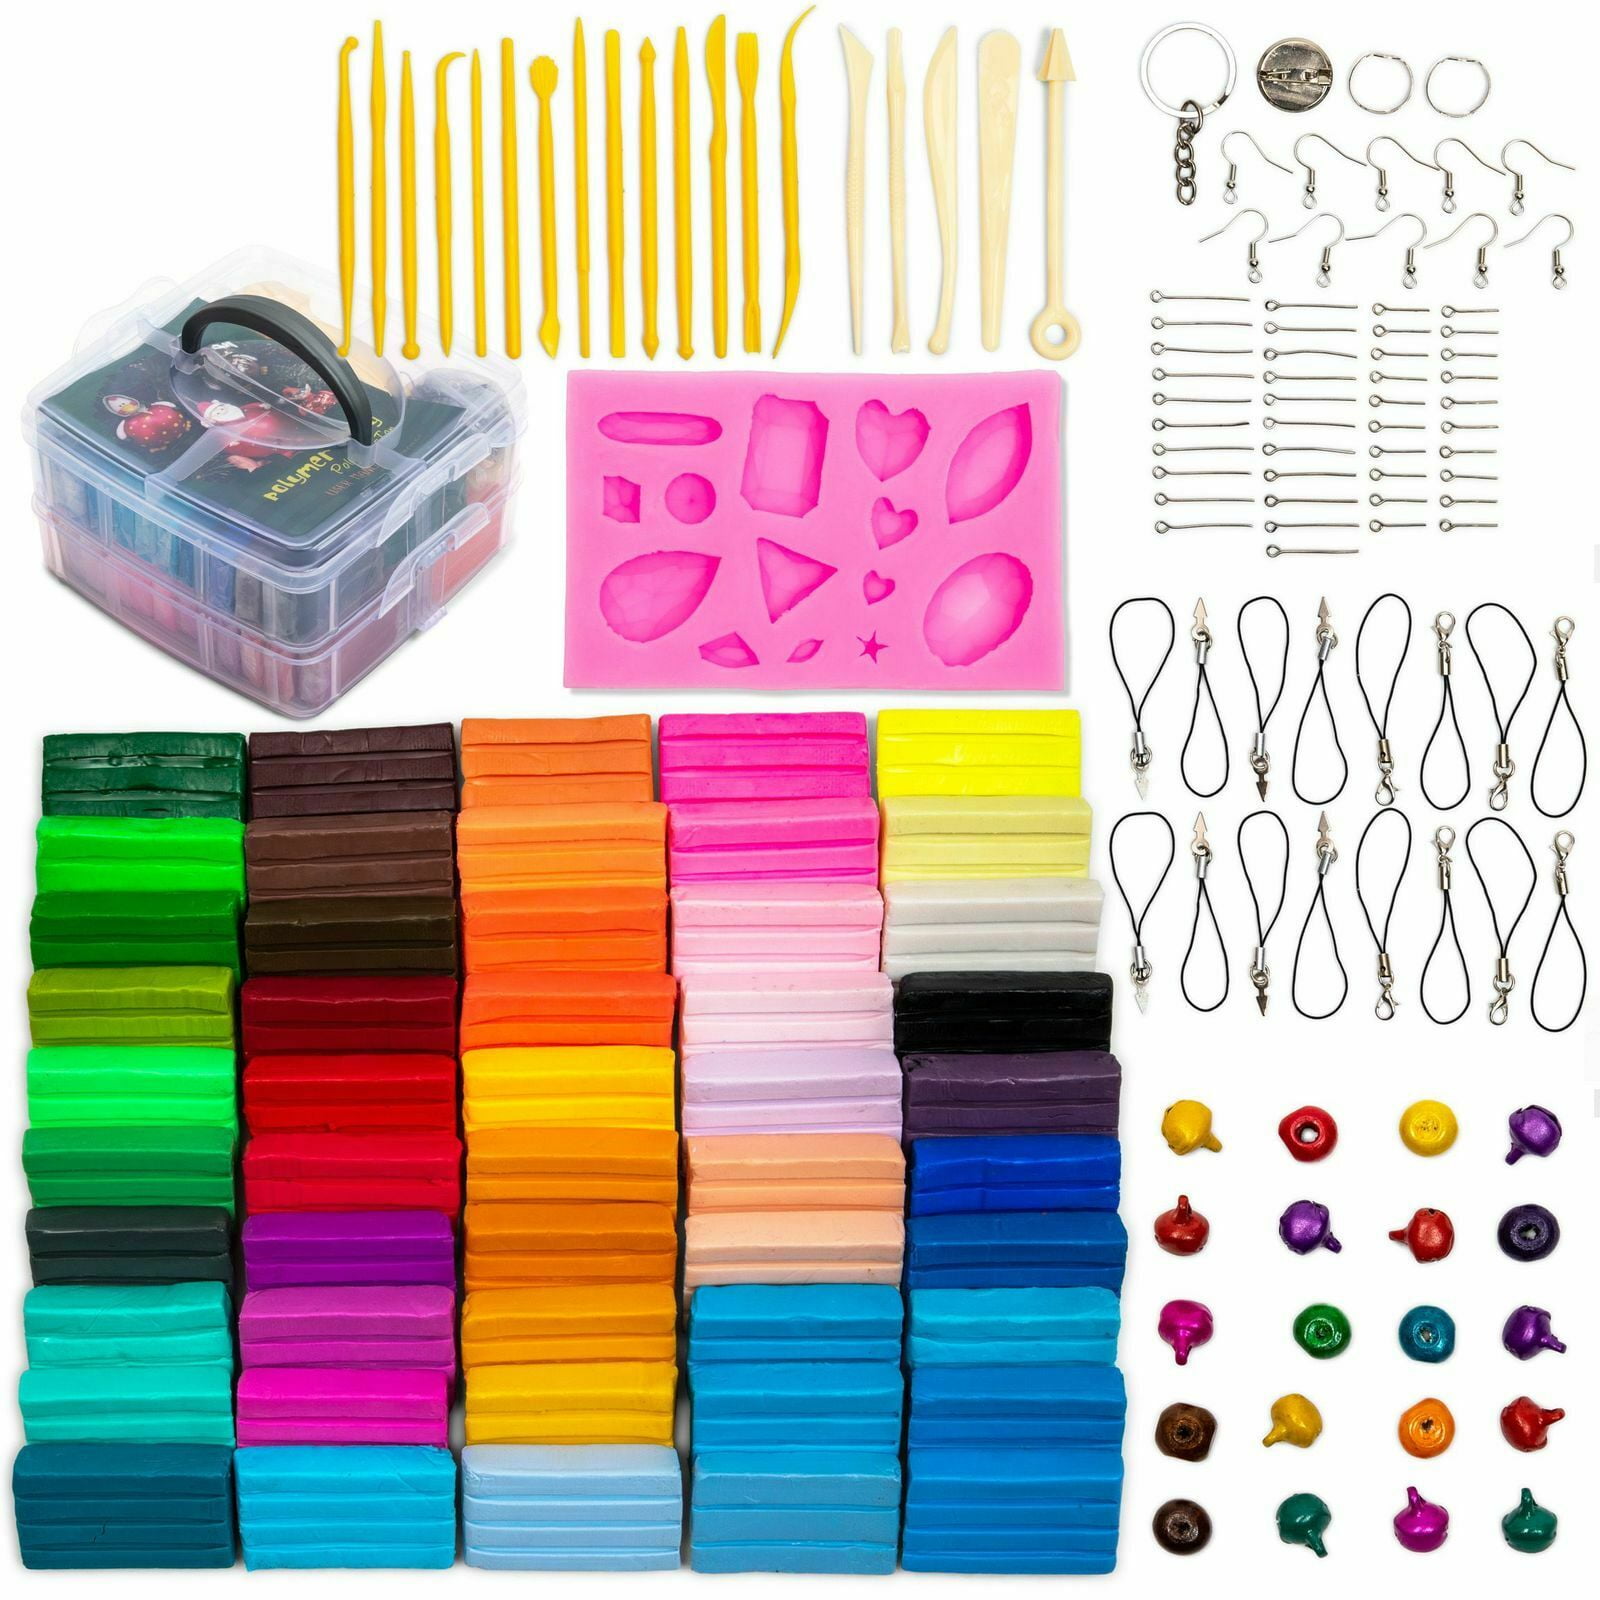 190pcs Polymer Clay 50 Colors,Air Dry Clay, Oven Bake Clay,Modeling Clay for Kids,Safe and Non-Toxic DIY Colored Clay with 19 Sculpting Tools